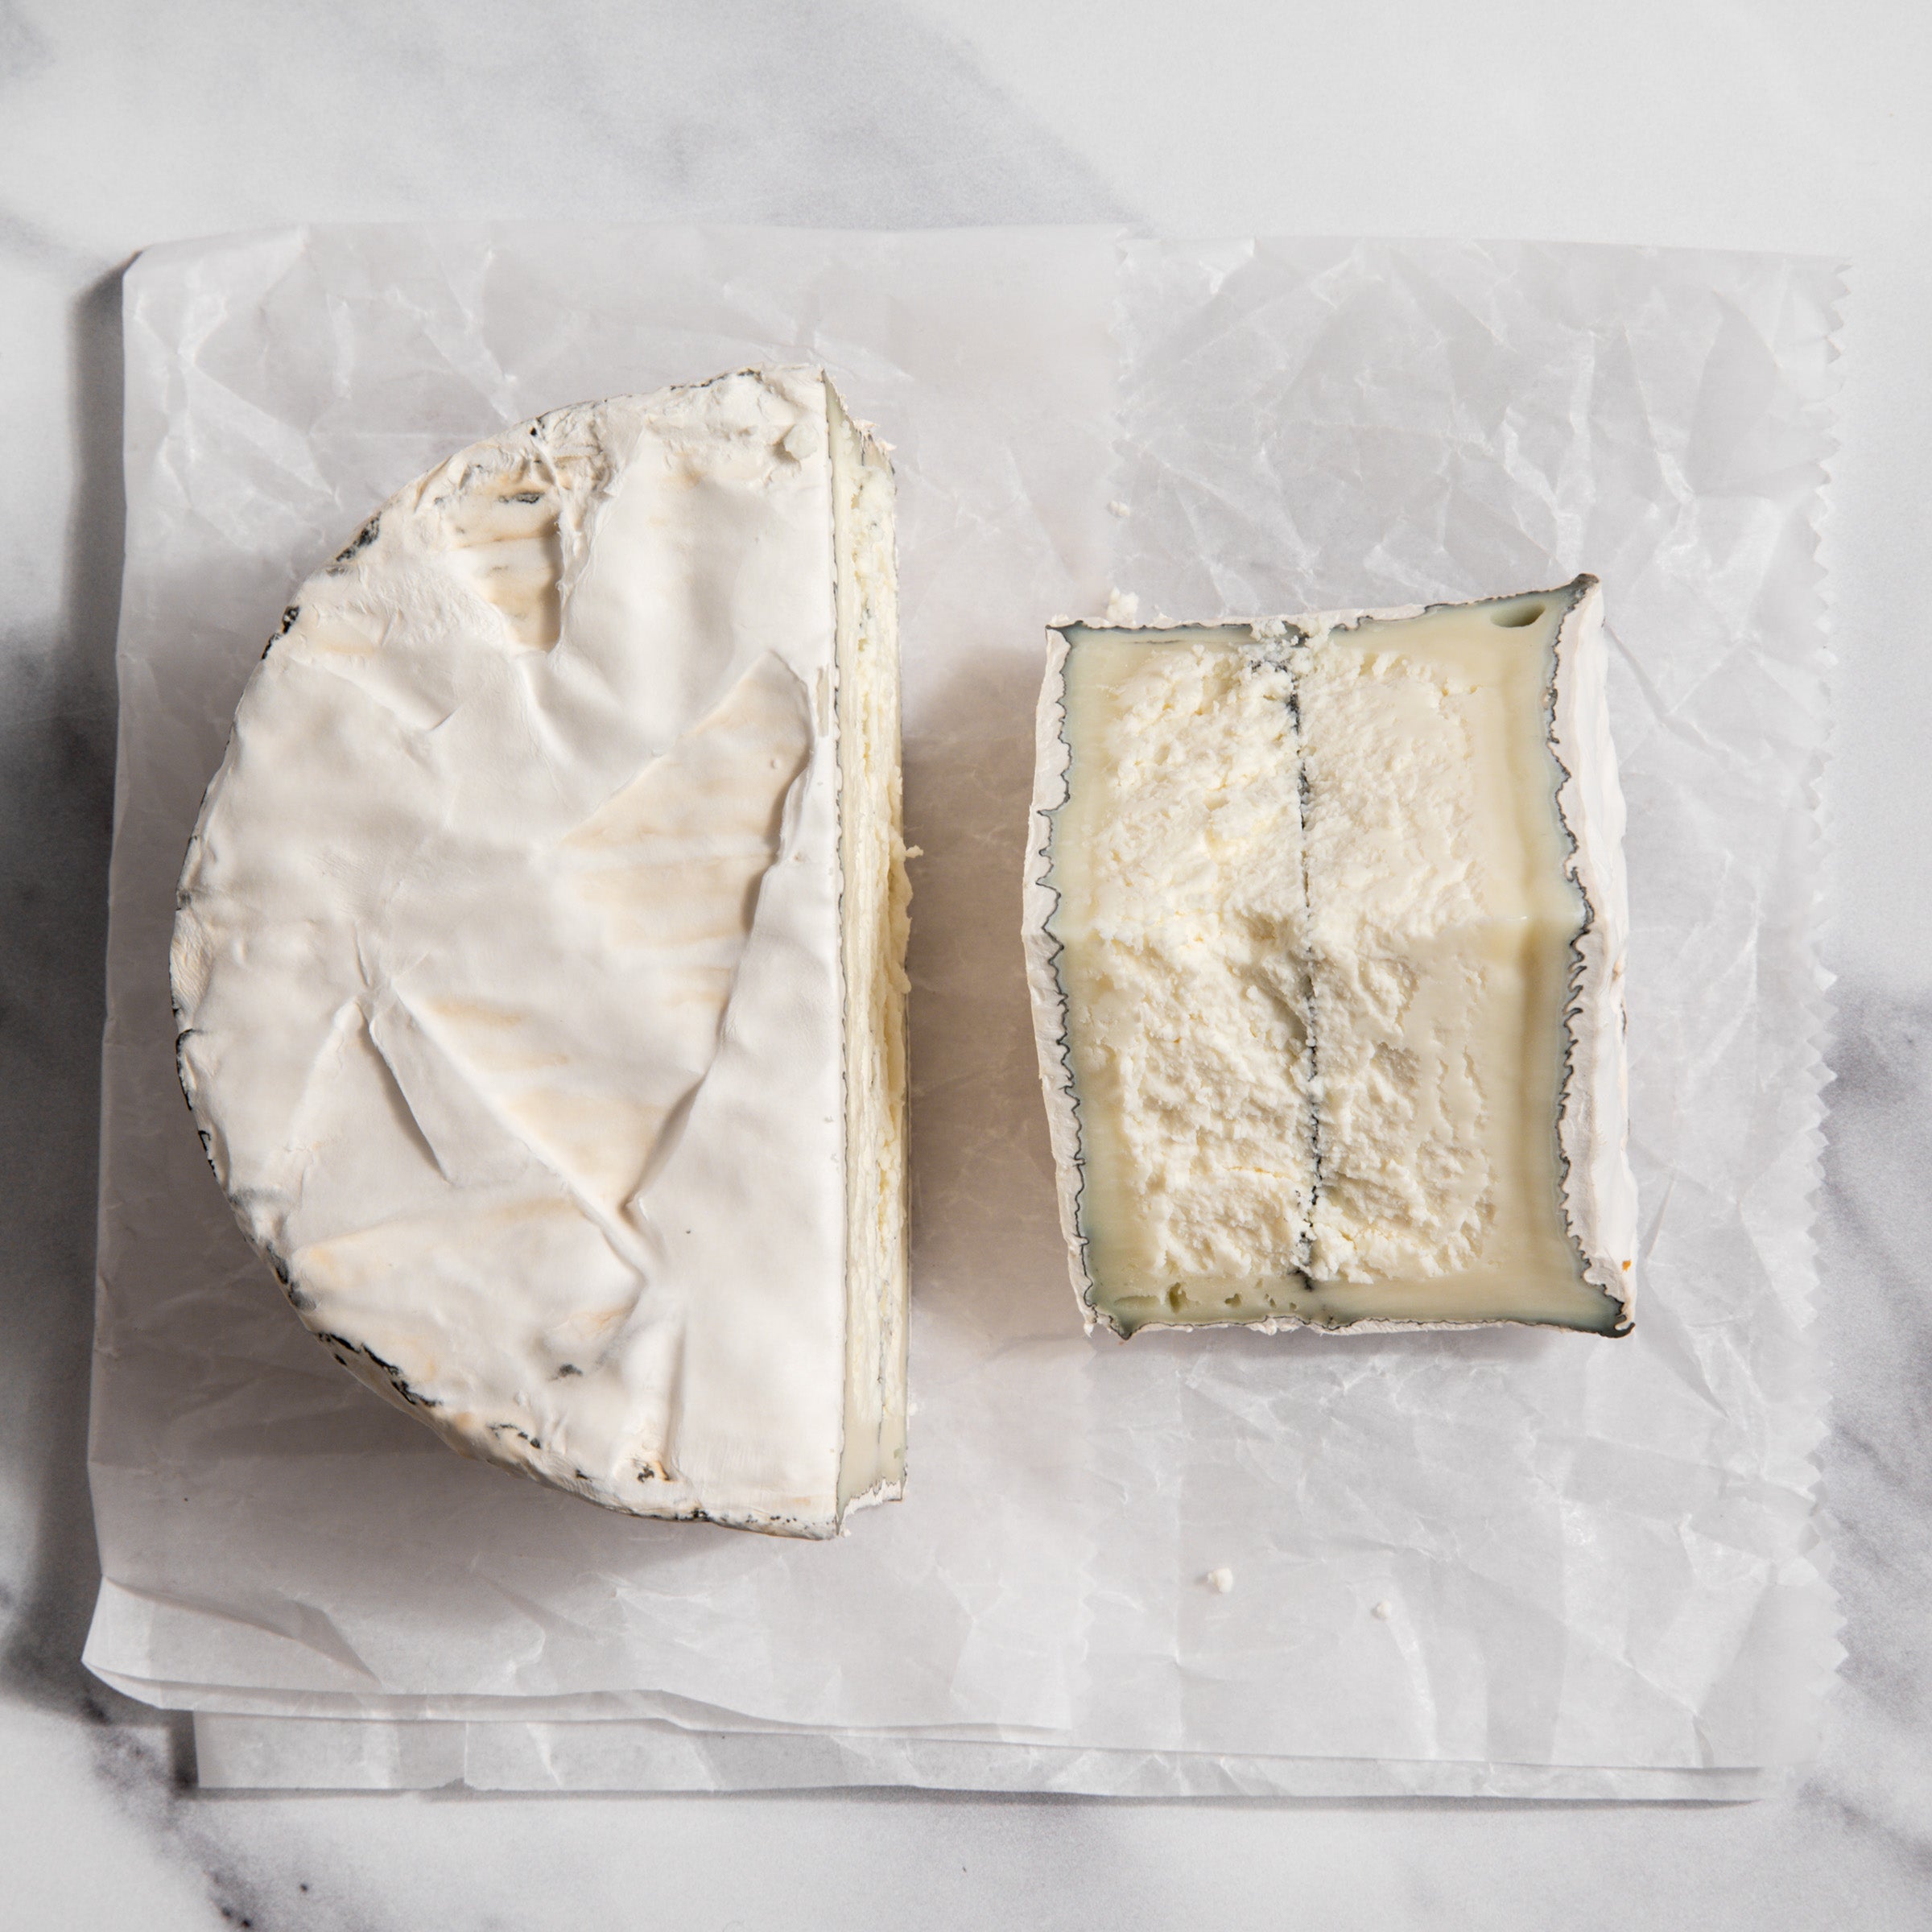 3 Reasons Why a Latino Family's Tiny Cheese Business Became a Giant